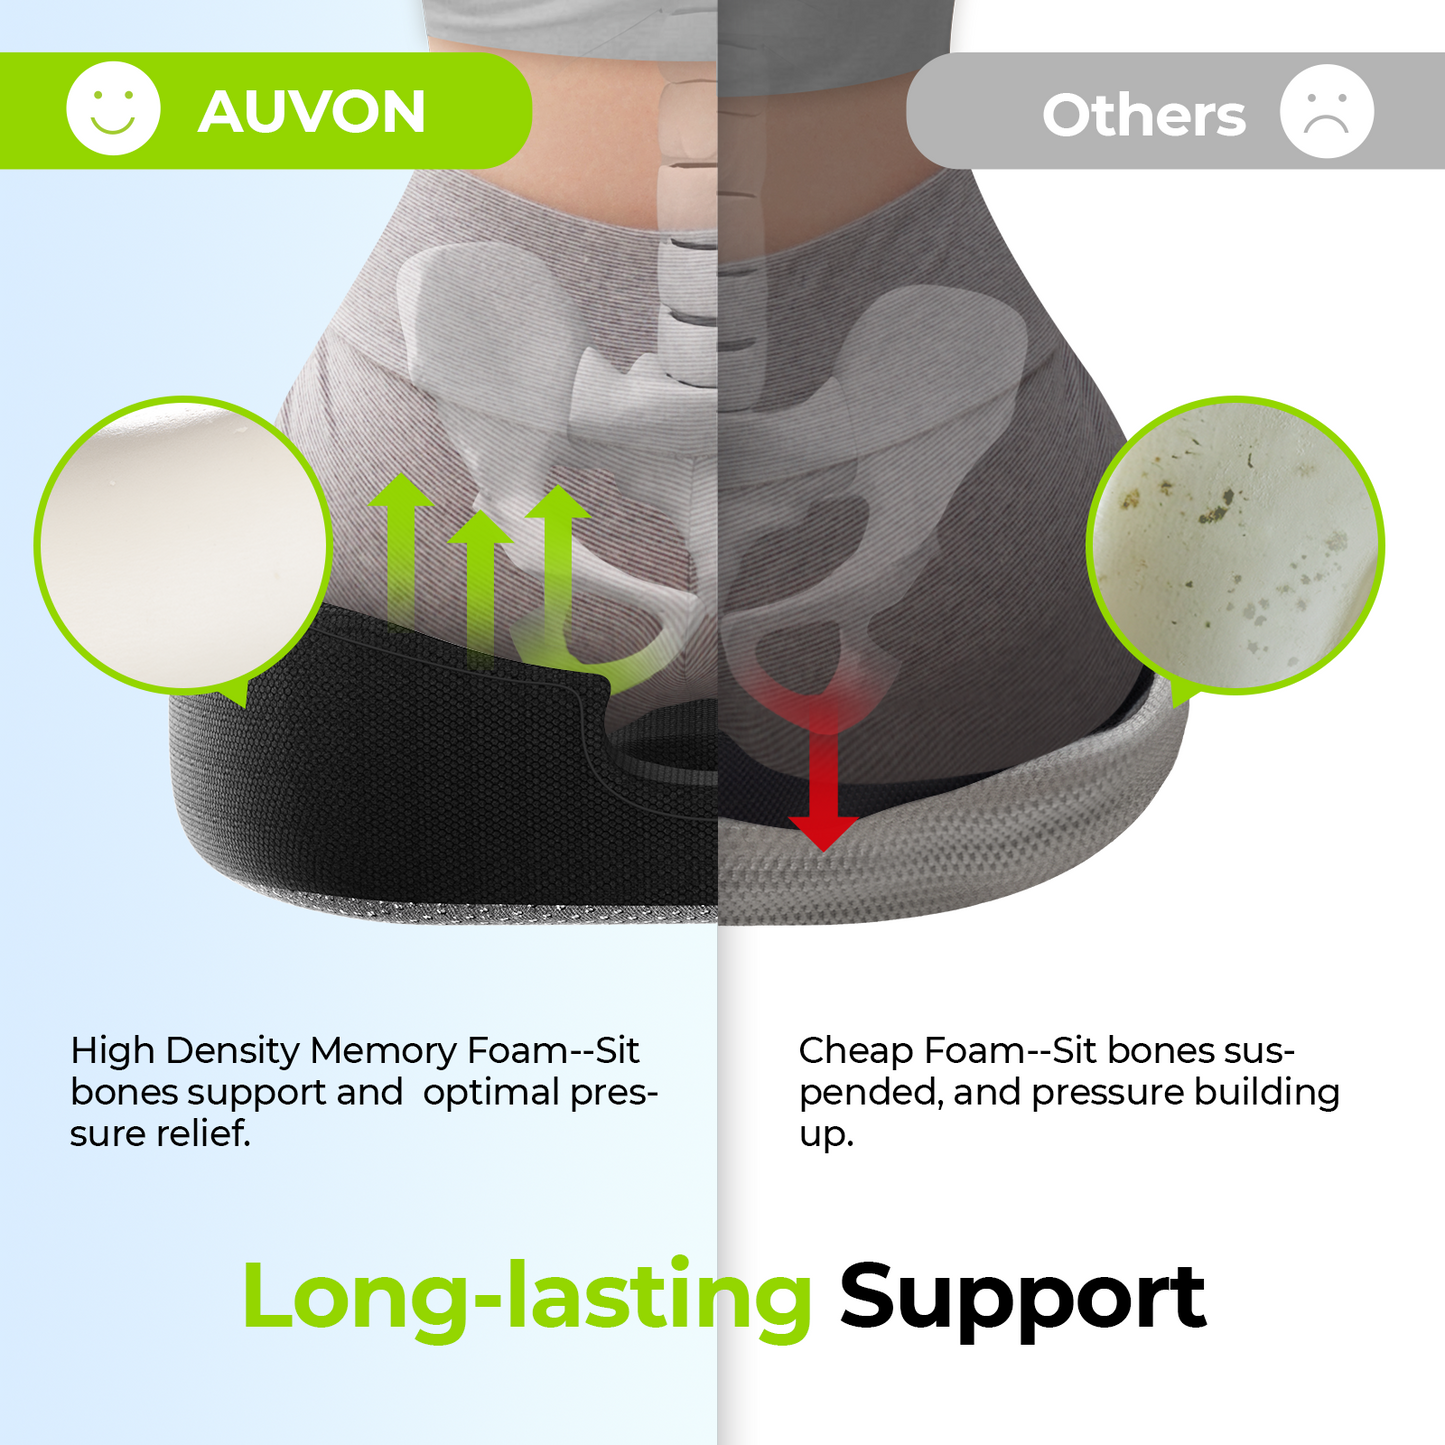 AUVON Innovation Donut Pillow for Hemorrhoids with Scientific Center Hole & U-Shaped Cutout, Orthopedic Pain Relief for Tailbone, Coccyx, Prostate, Postpartum Pregnancy & After Surgery Sitting Relief